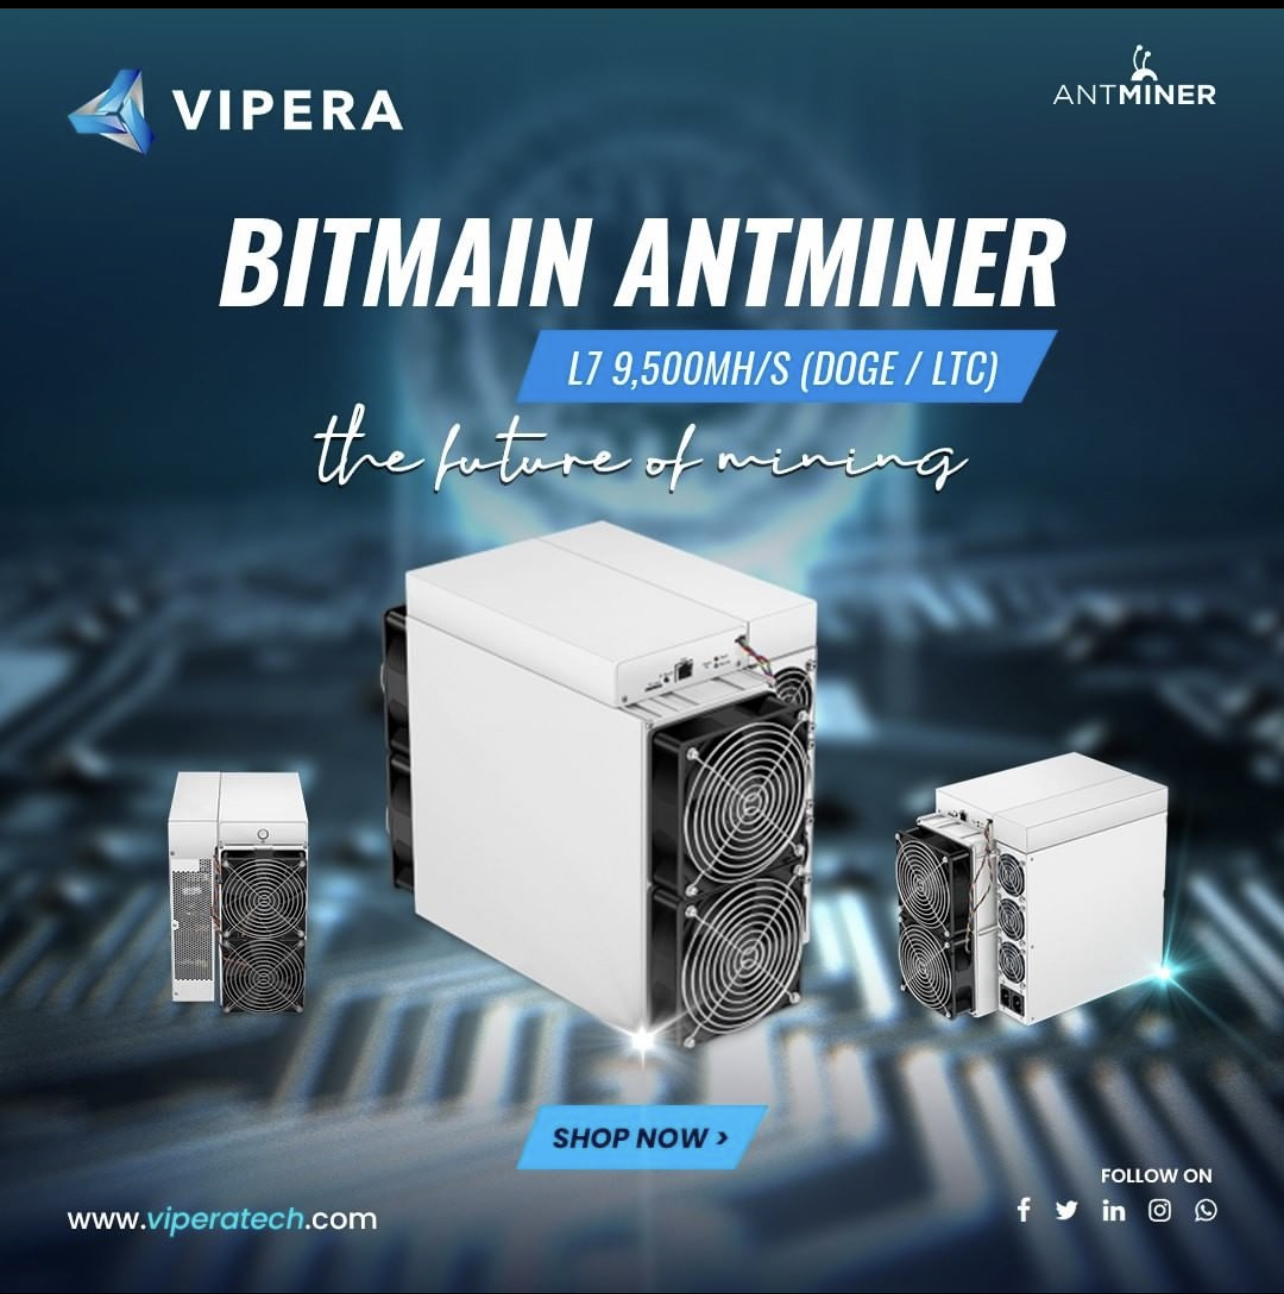 Vipera LLC, Announced Pre Order of the New 2021 Model Antminer L7